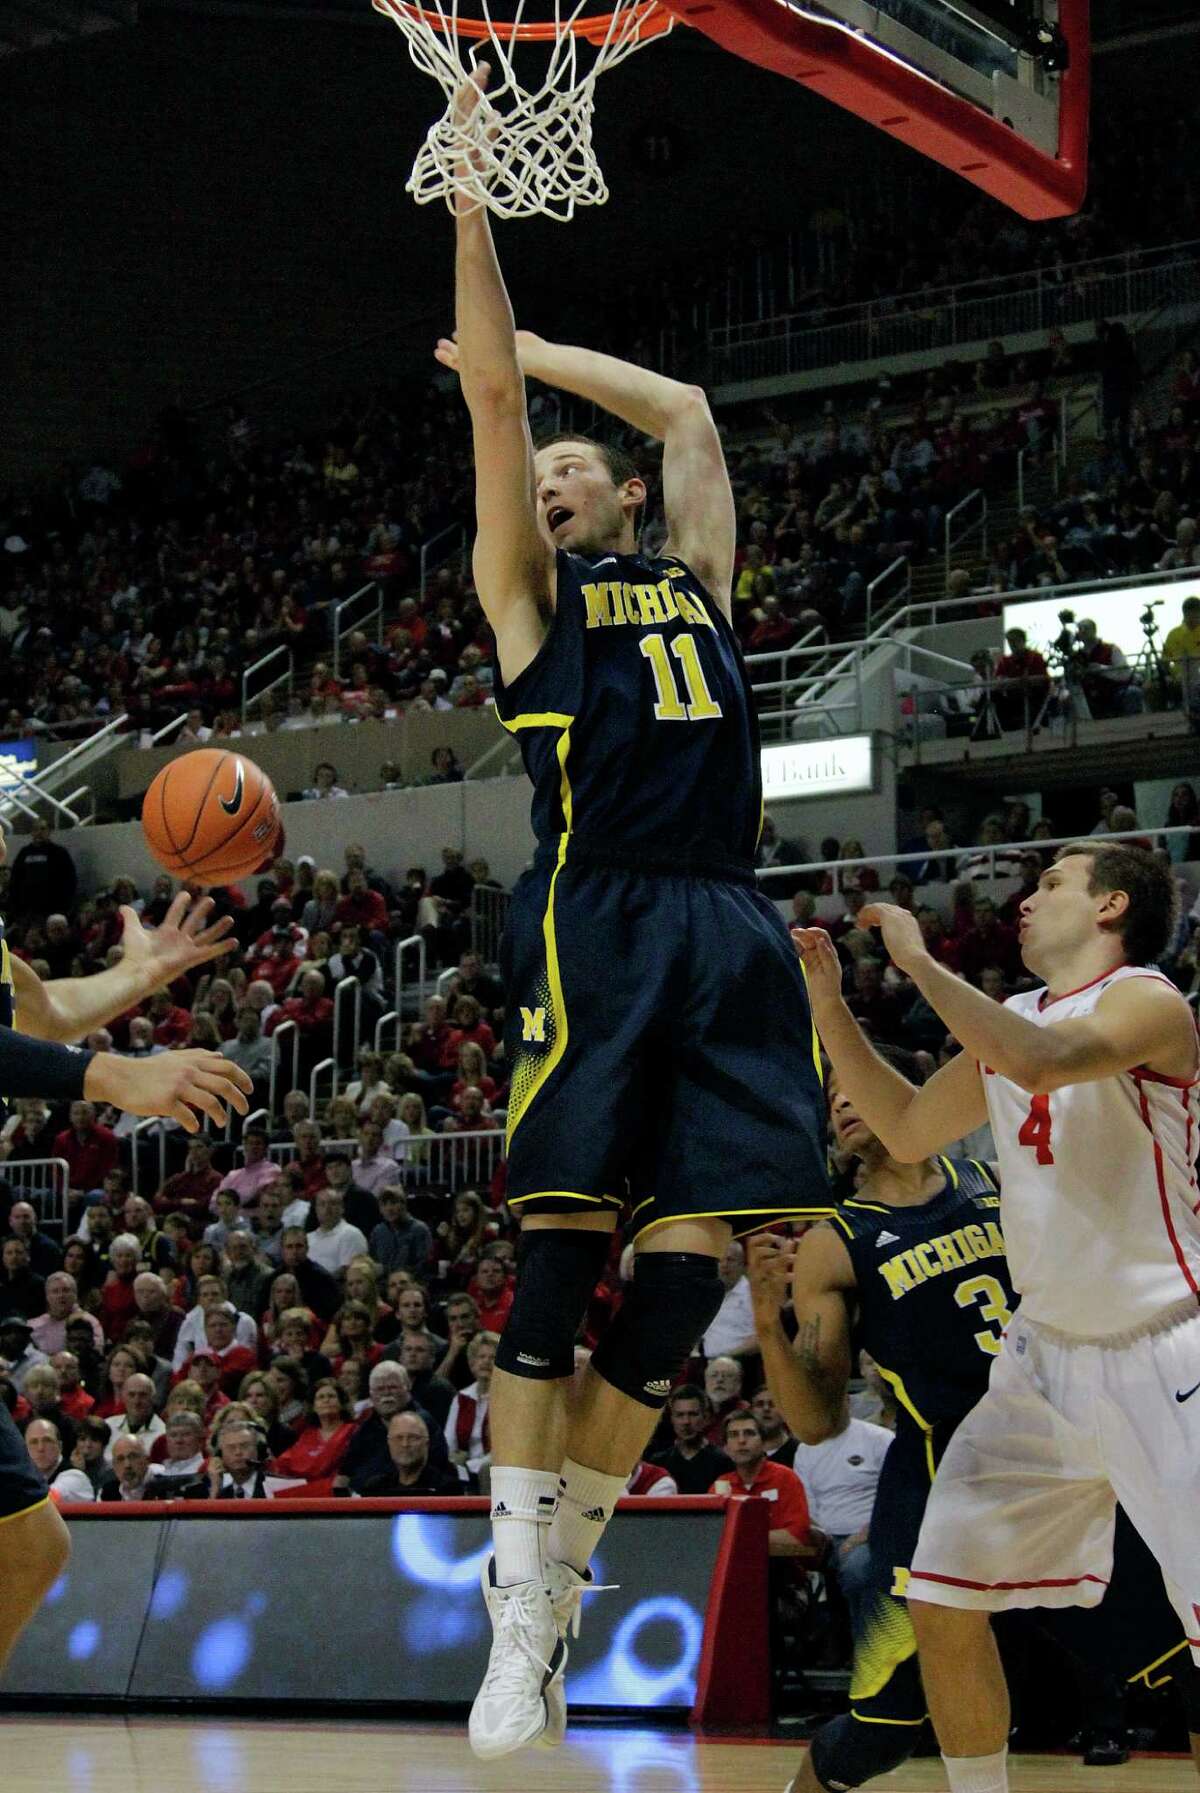 Michigan guard Nik Stauskas (11) fights for a rebound against Bradley's Jake Eastman (4) during the first half of an NCAA college basketball game on Saturday, Dec. 1, 2012, in Peoria Ill. (AP Photo/Seth Perlman)